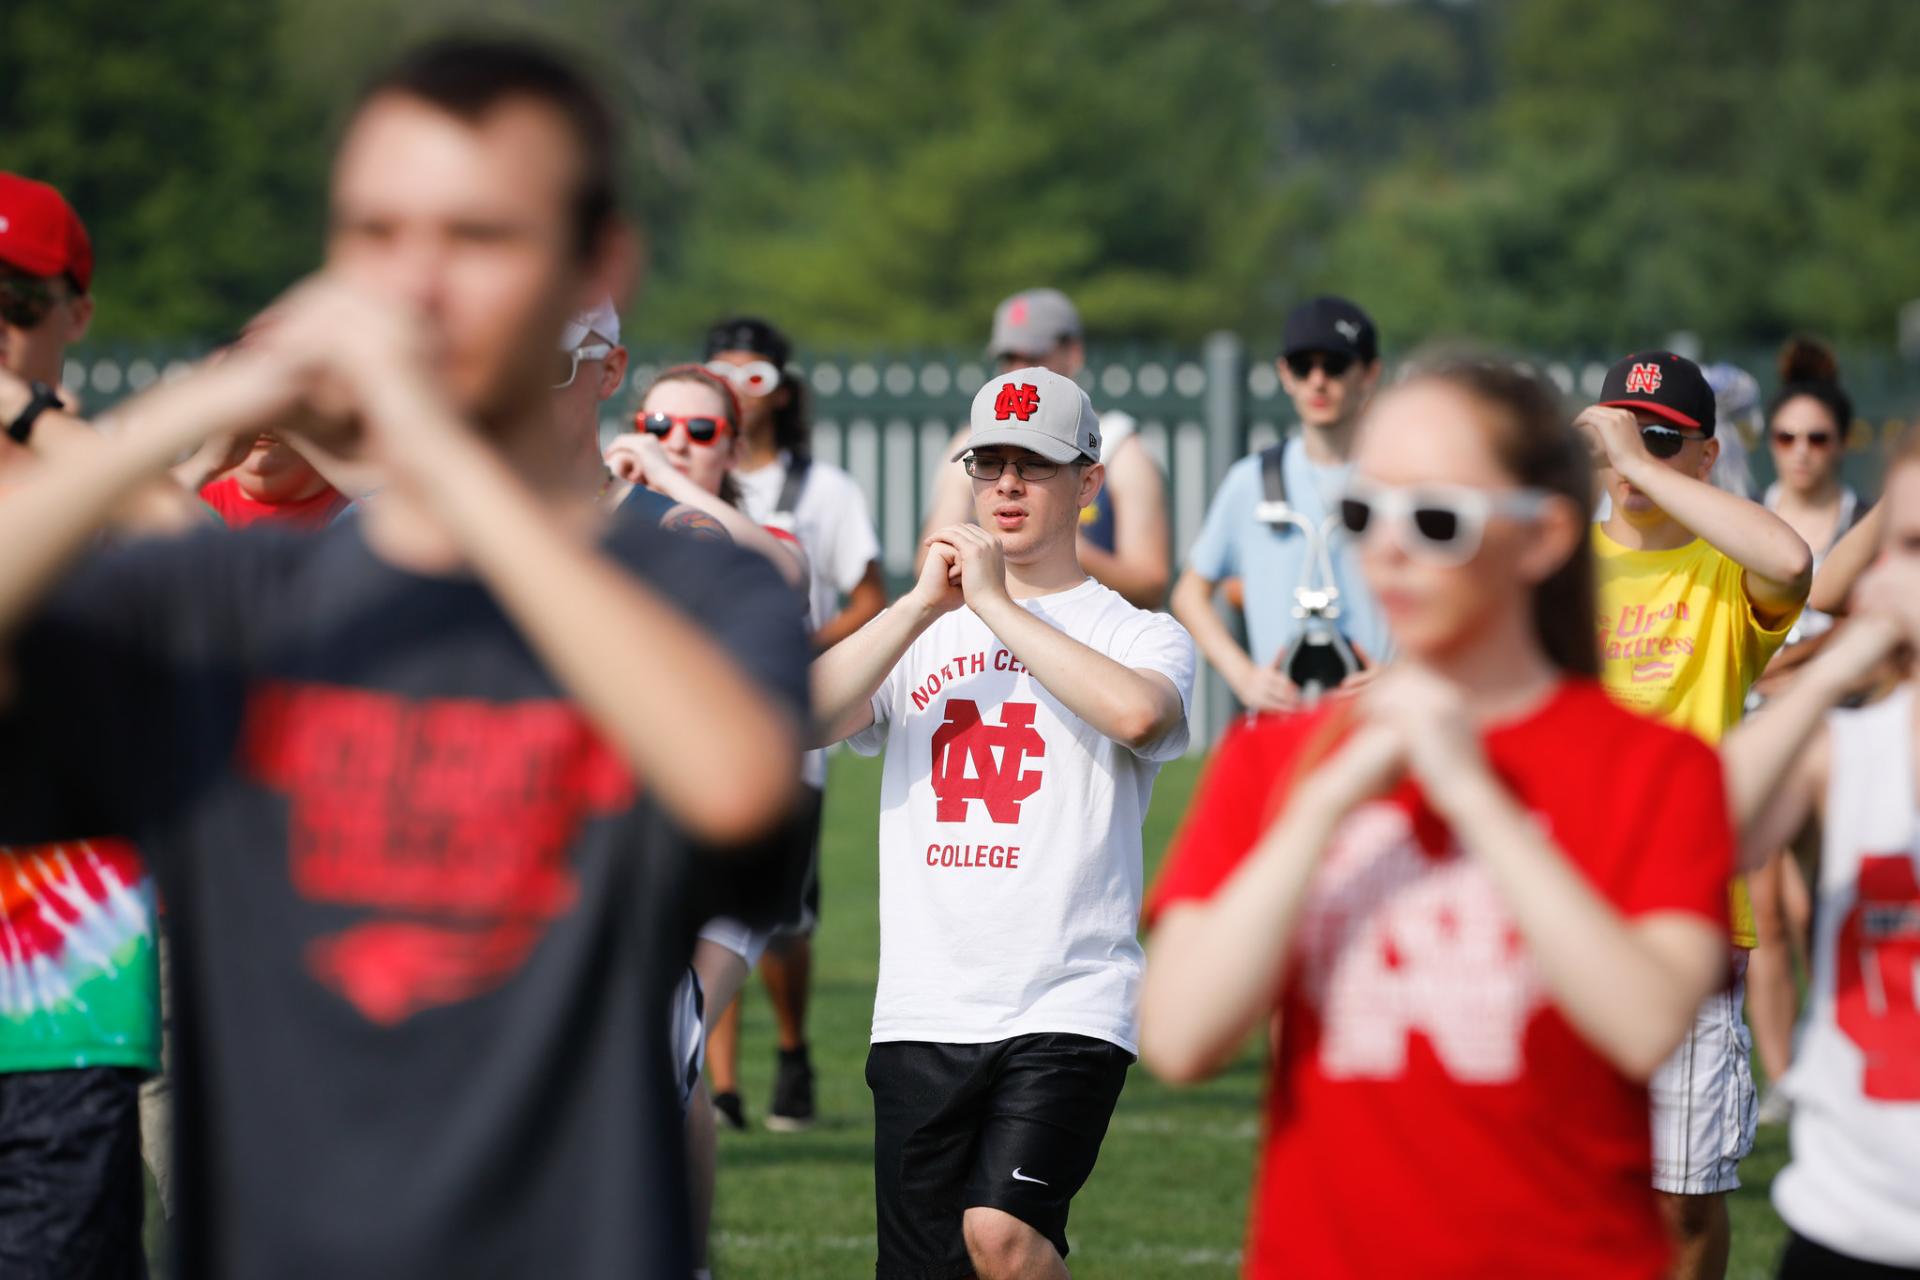 North Central College's marching band prepares for the fall season